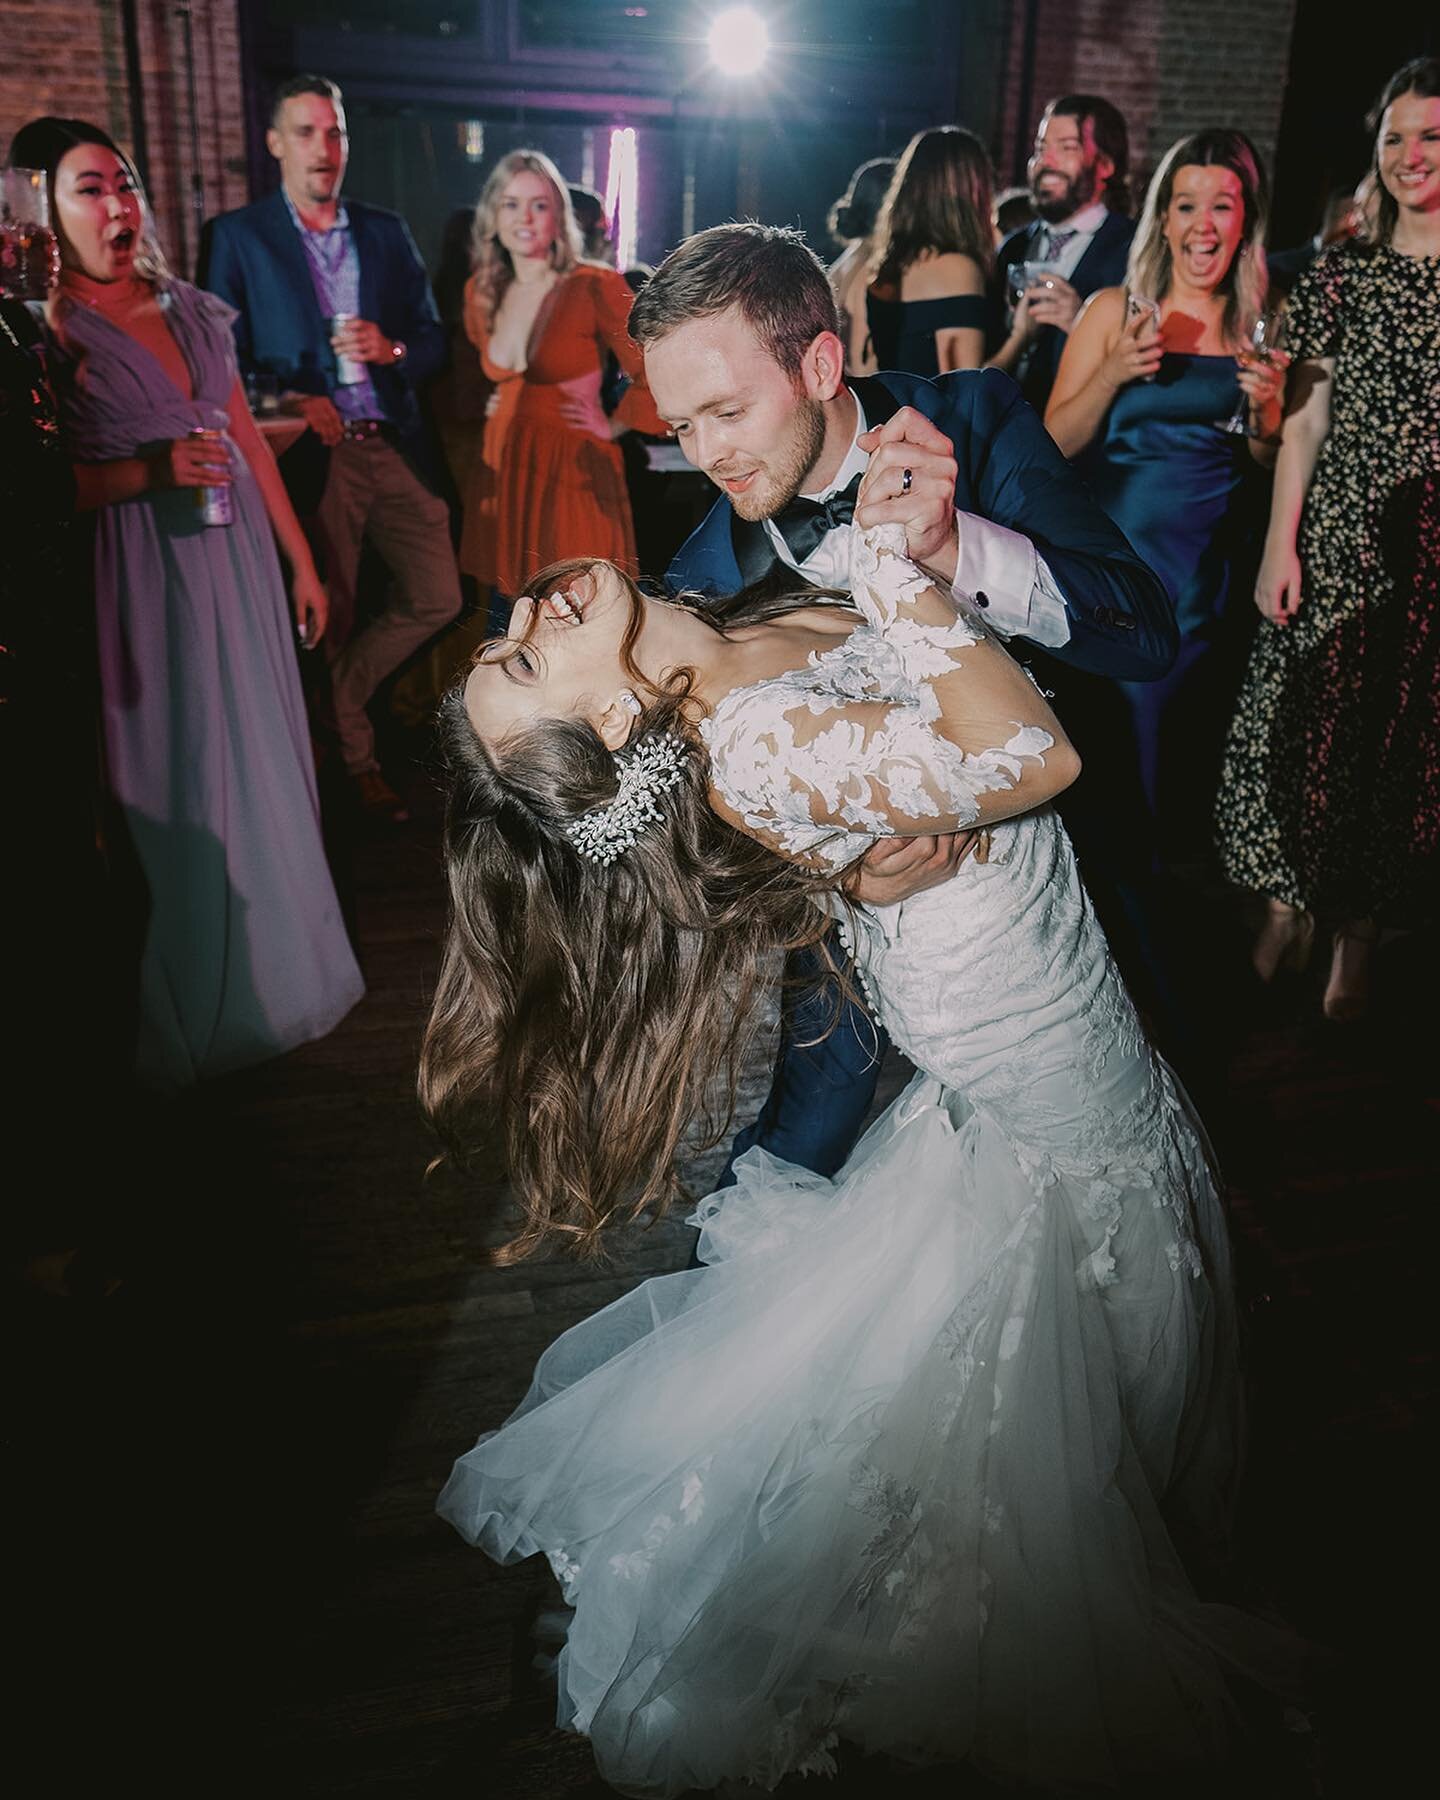 Swept off our collective feet, still lost in this perfectly captured moment of Kirsten &amp; Jacob 💃🕺✨
photo | @claireryser